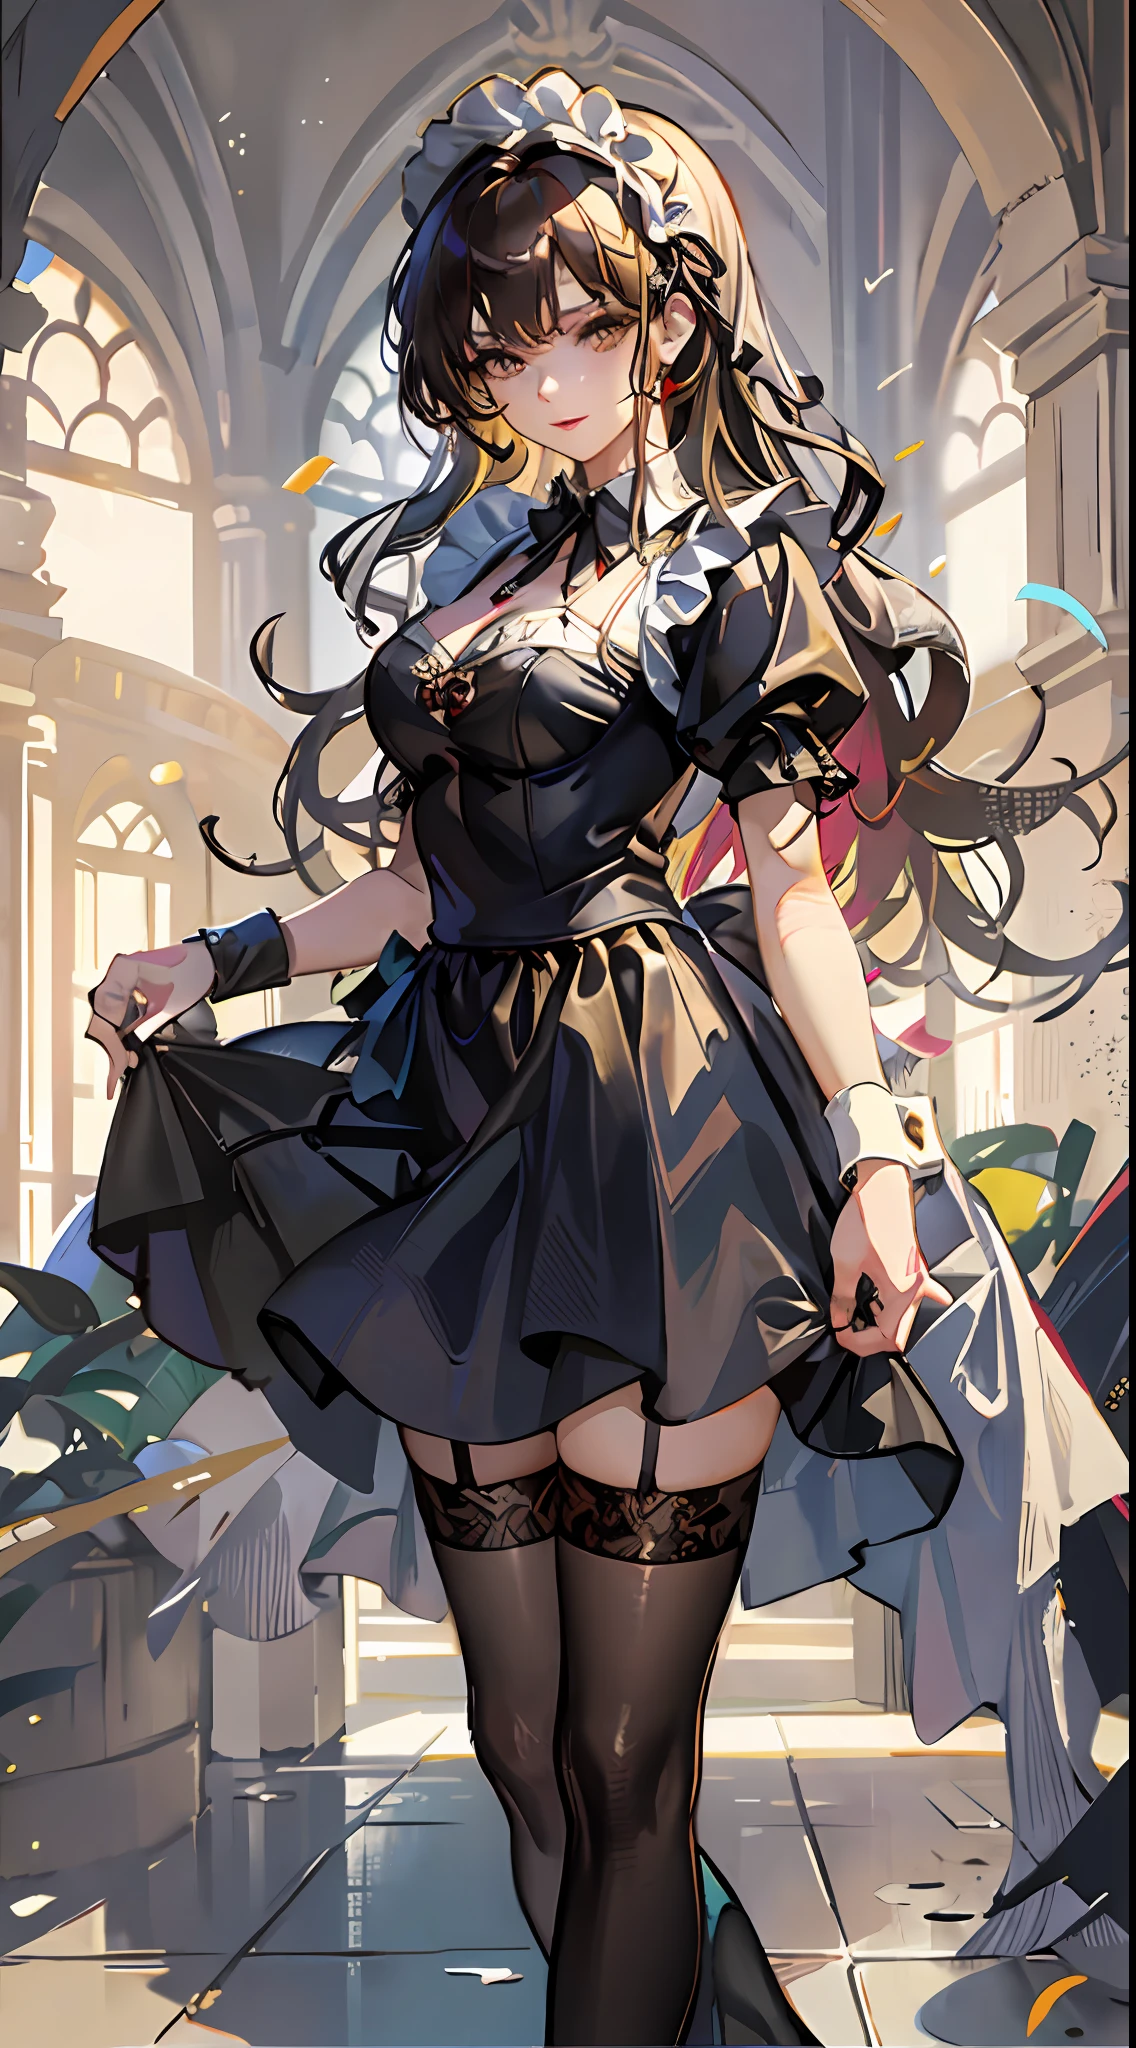 best qualtiy，8k，Best quality，(the detail:1.4),The picture is clear，a close up of a woman in a dress and stockings, anime girl in a maid costume, gorgeous maid, Maid outfit,One poses for a photo in a maid costume，is an anime character who wears a maid costume，Drawn in Artgerm's style，Has long blonde hair，Sexy girl with dark brown hair，the maid outfit，A dress dressed in lace，Walking past you，Luxurious theme，realistic dress，Skin details are highly detailed，Watch machinery，Dirty floor，Beautiful maid，feminine beauty，Stunning character art，Ray traching